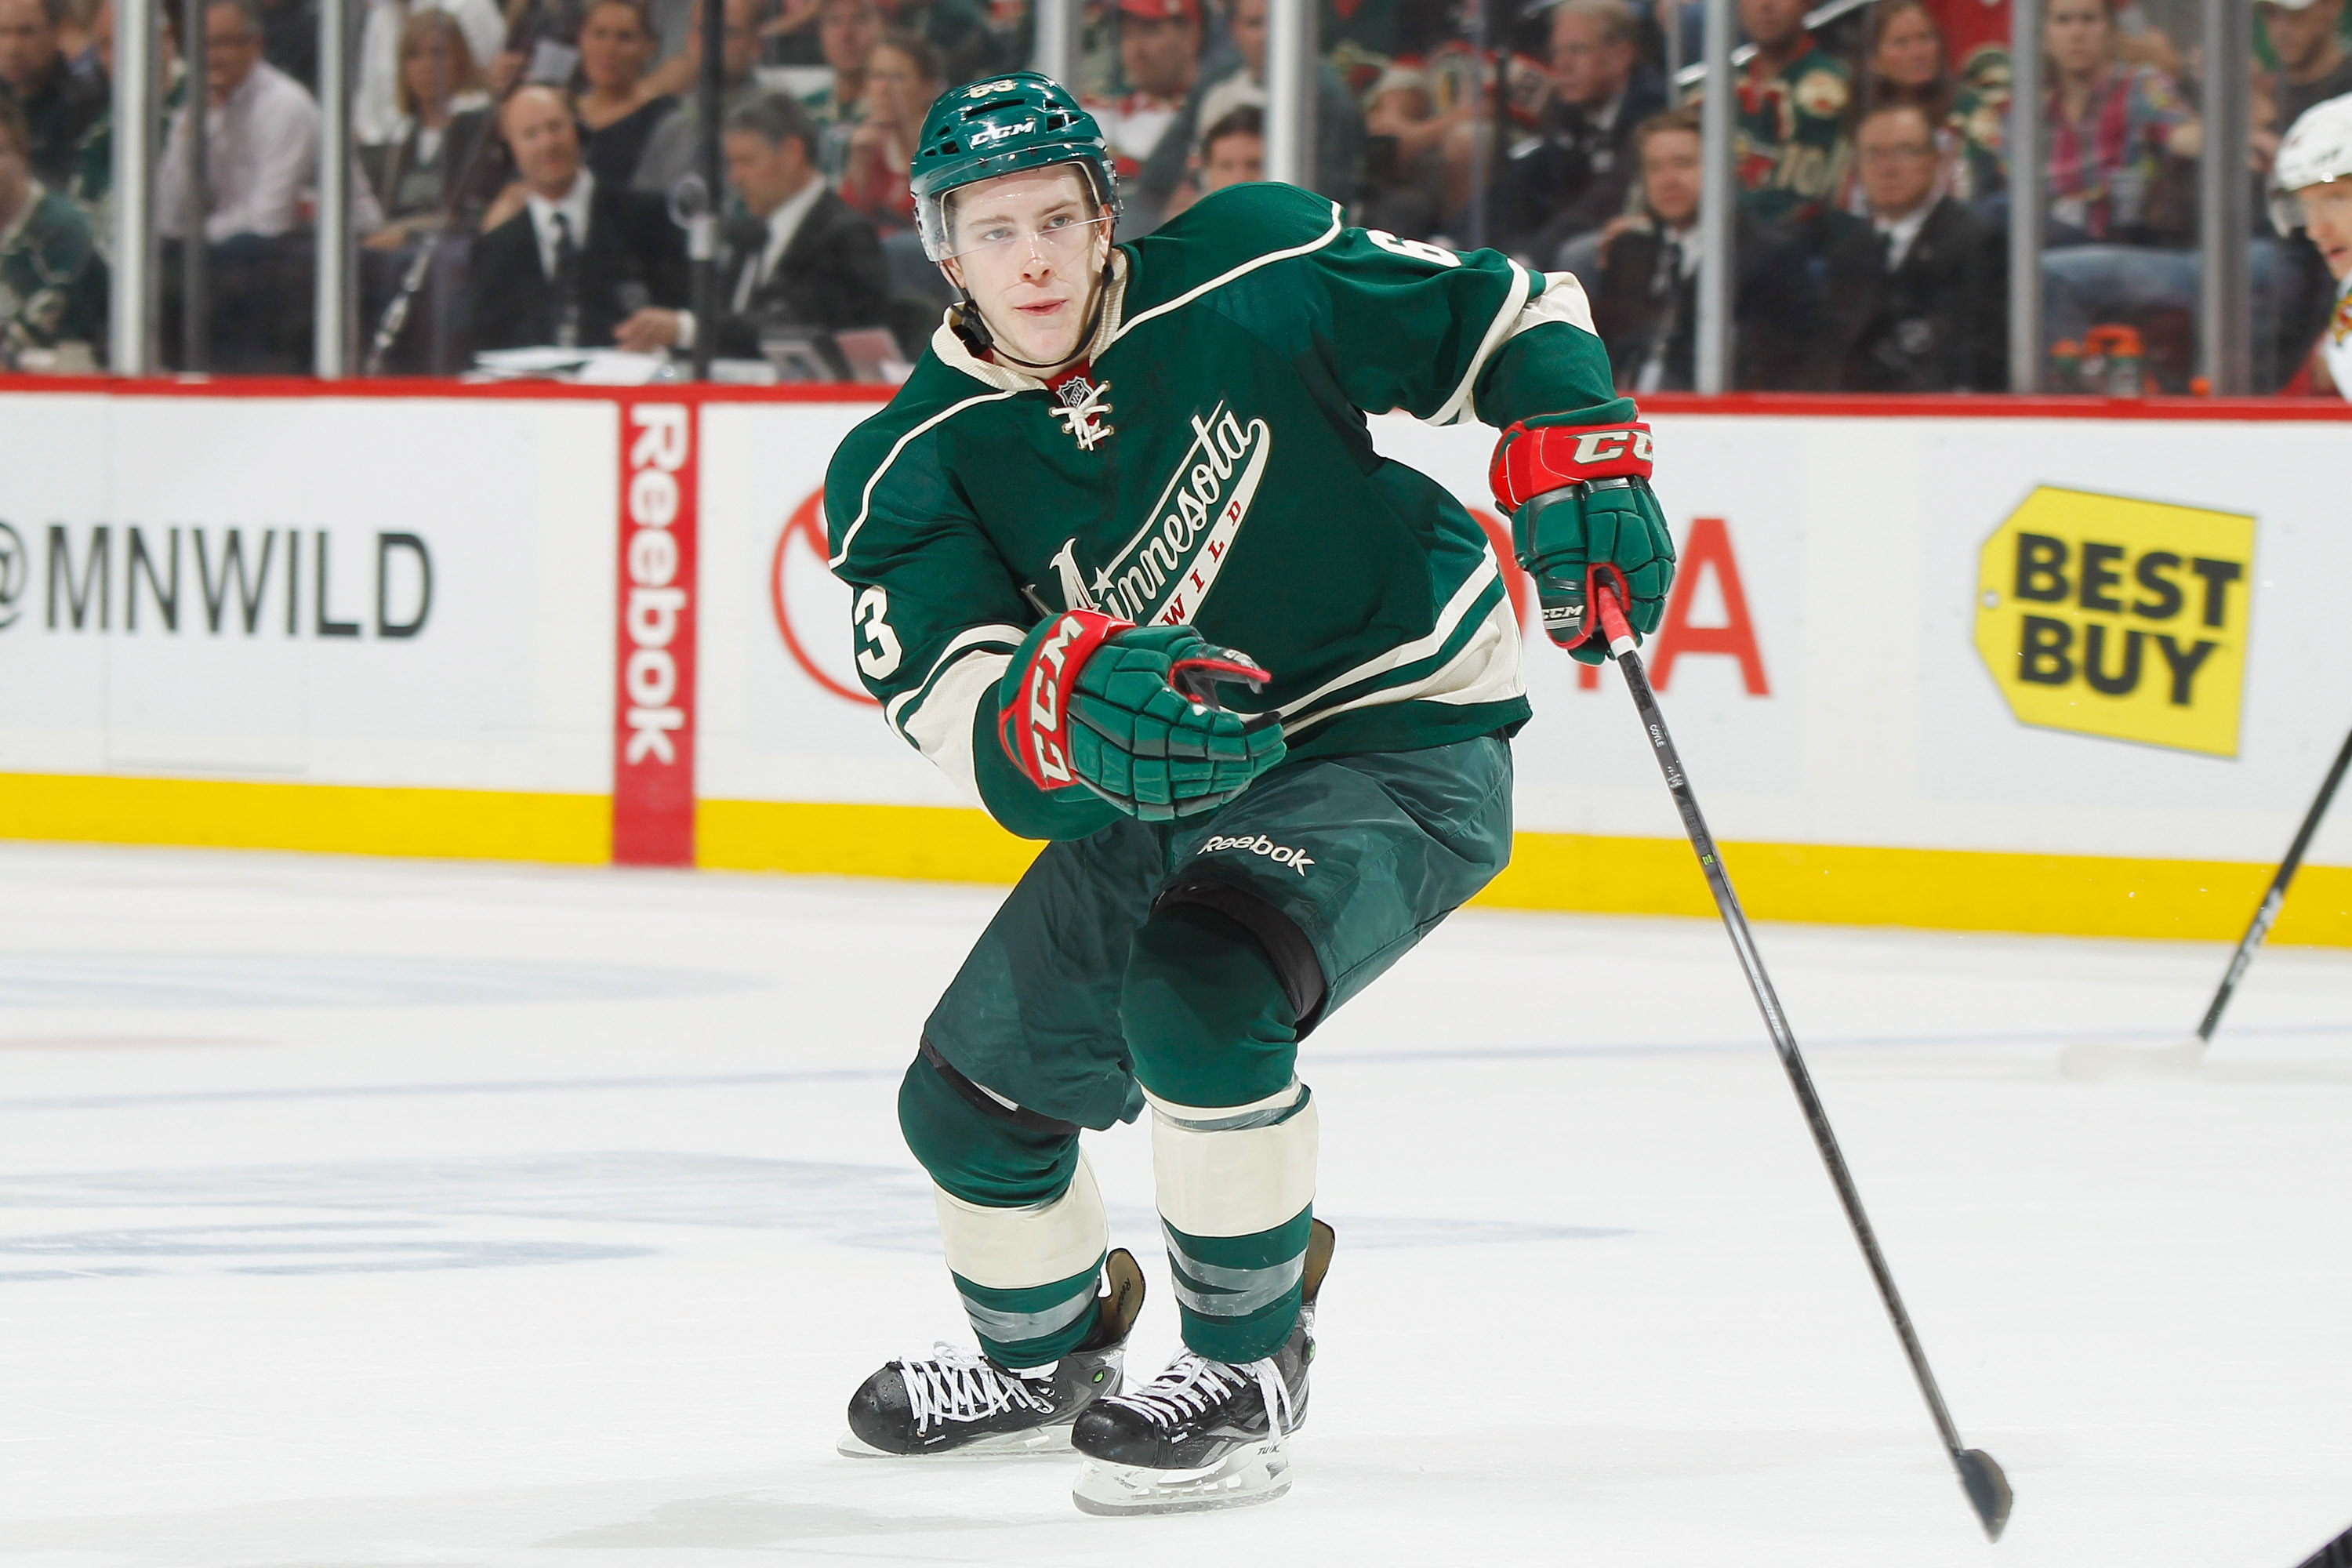 Report: Bruins acquire forward Charlie Coyle from Wild